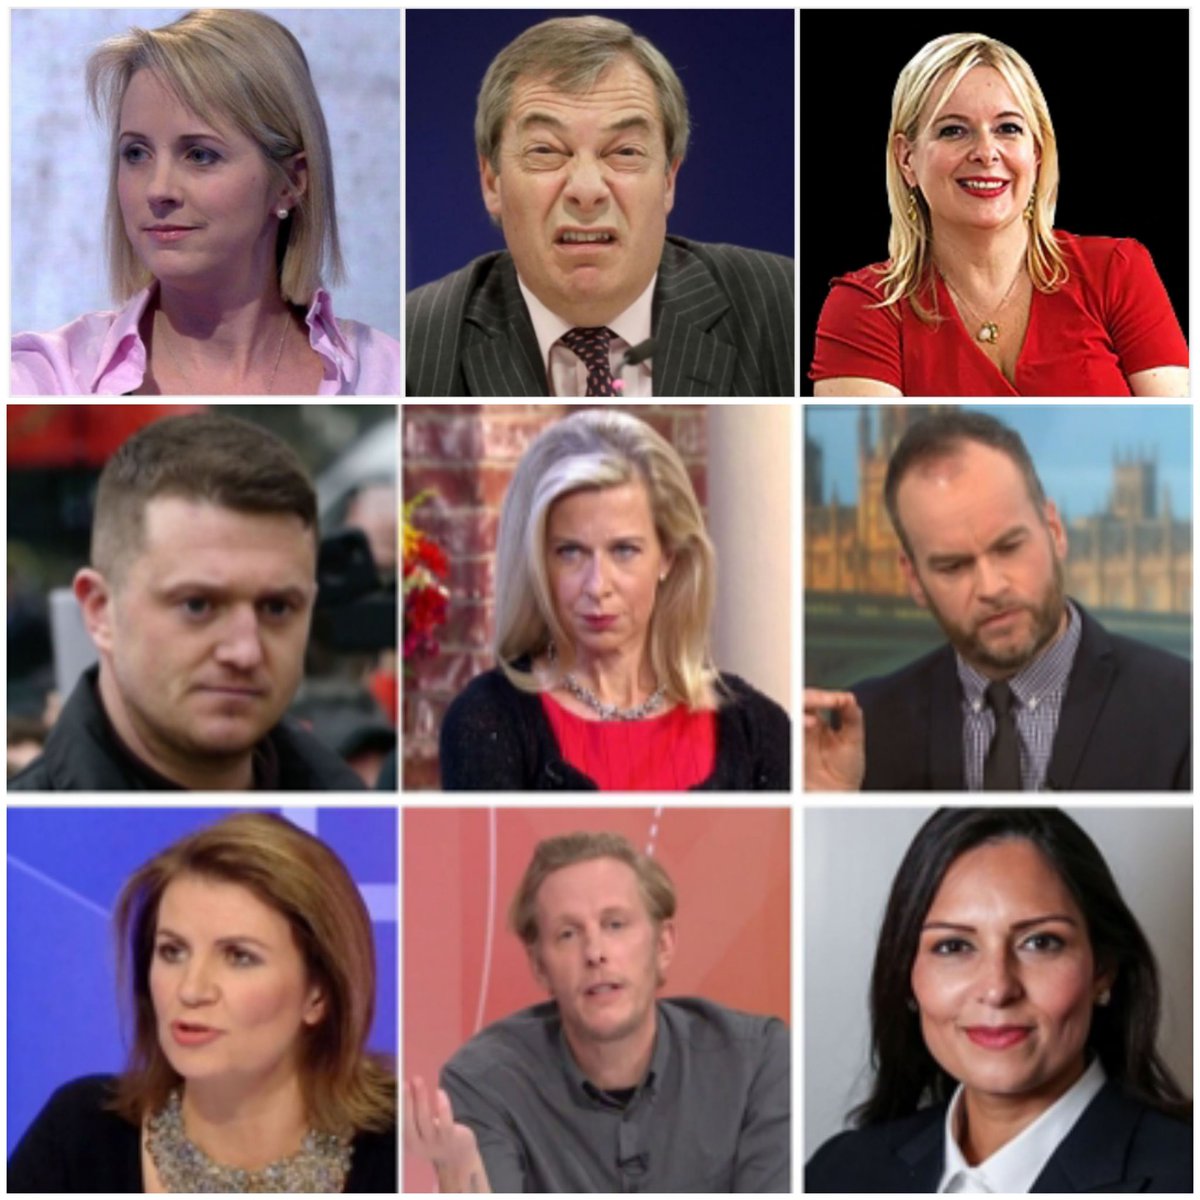 Lots of hard-right trolls saying I want to shut down debate. Nope. I want the opposite of what they claim: there are tens of millions of articulate, interesting people in Britain, yet we're relentlessly fed a tiny bandwidth of views from the same tiny pool of opportunist cranks.